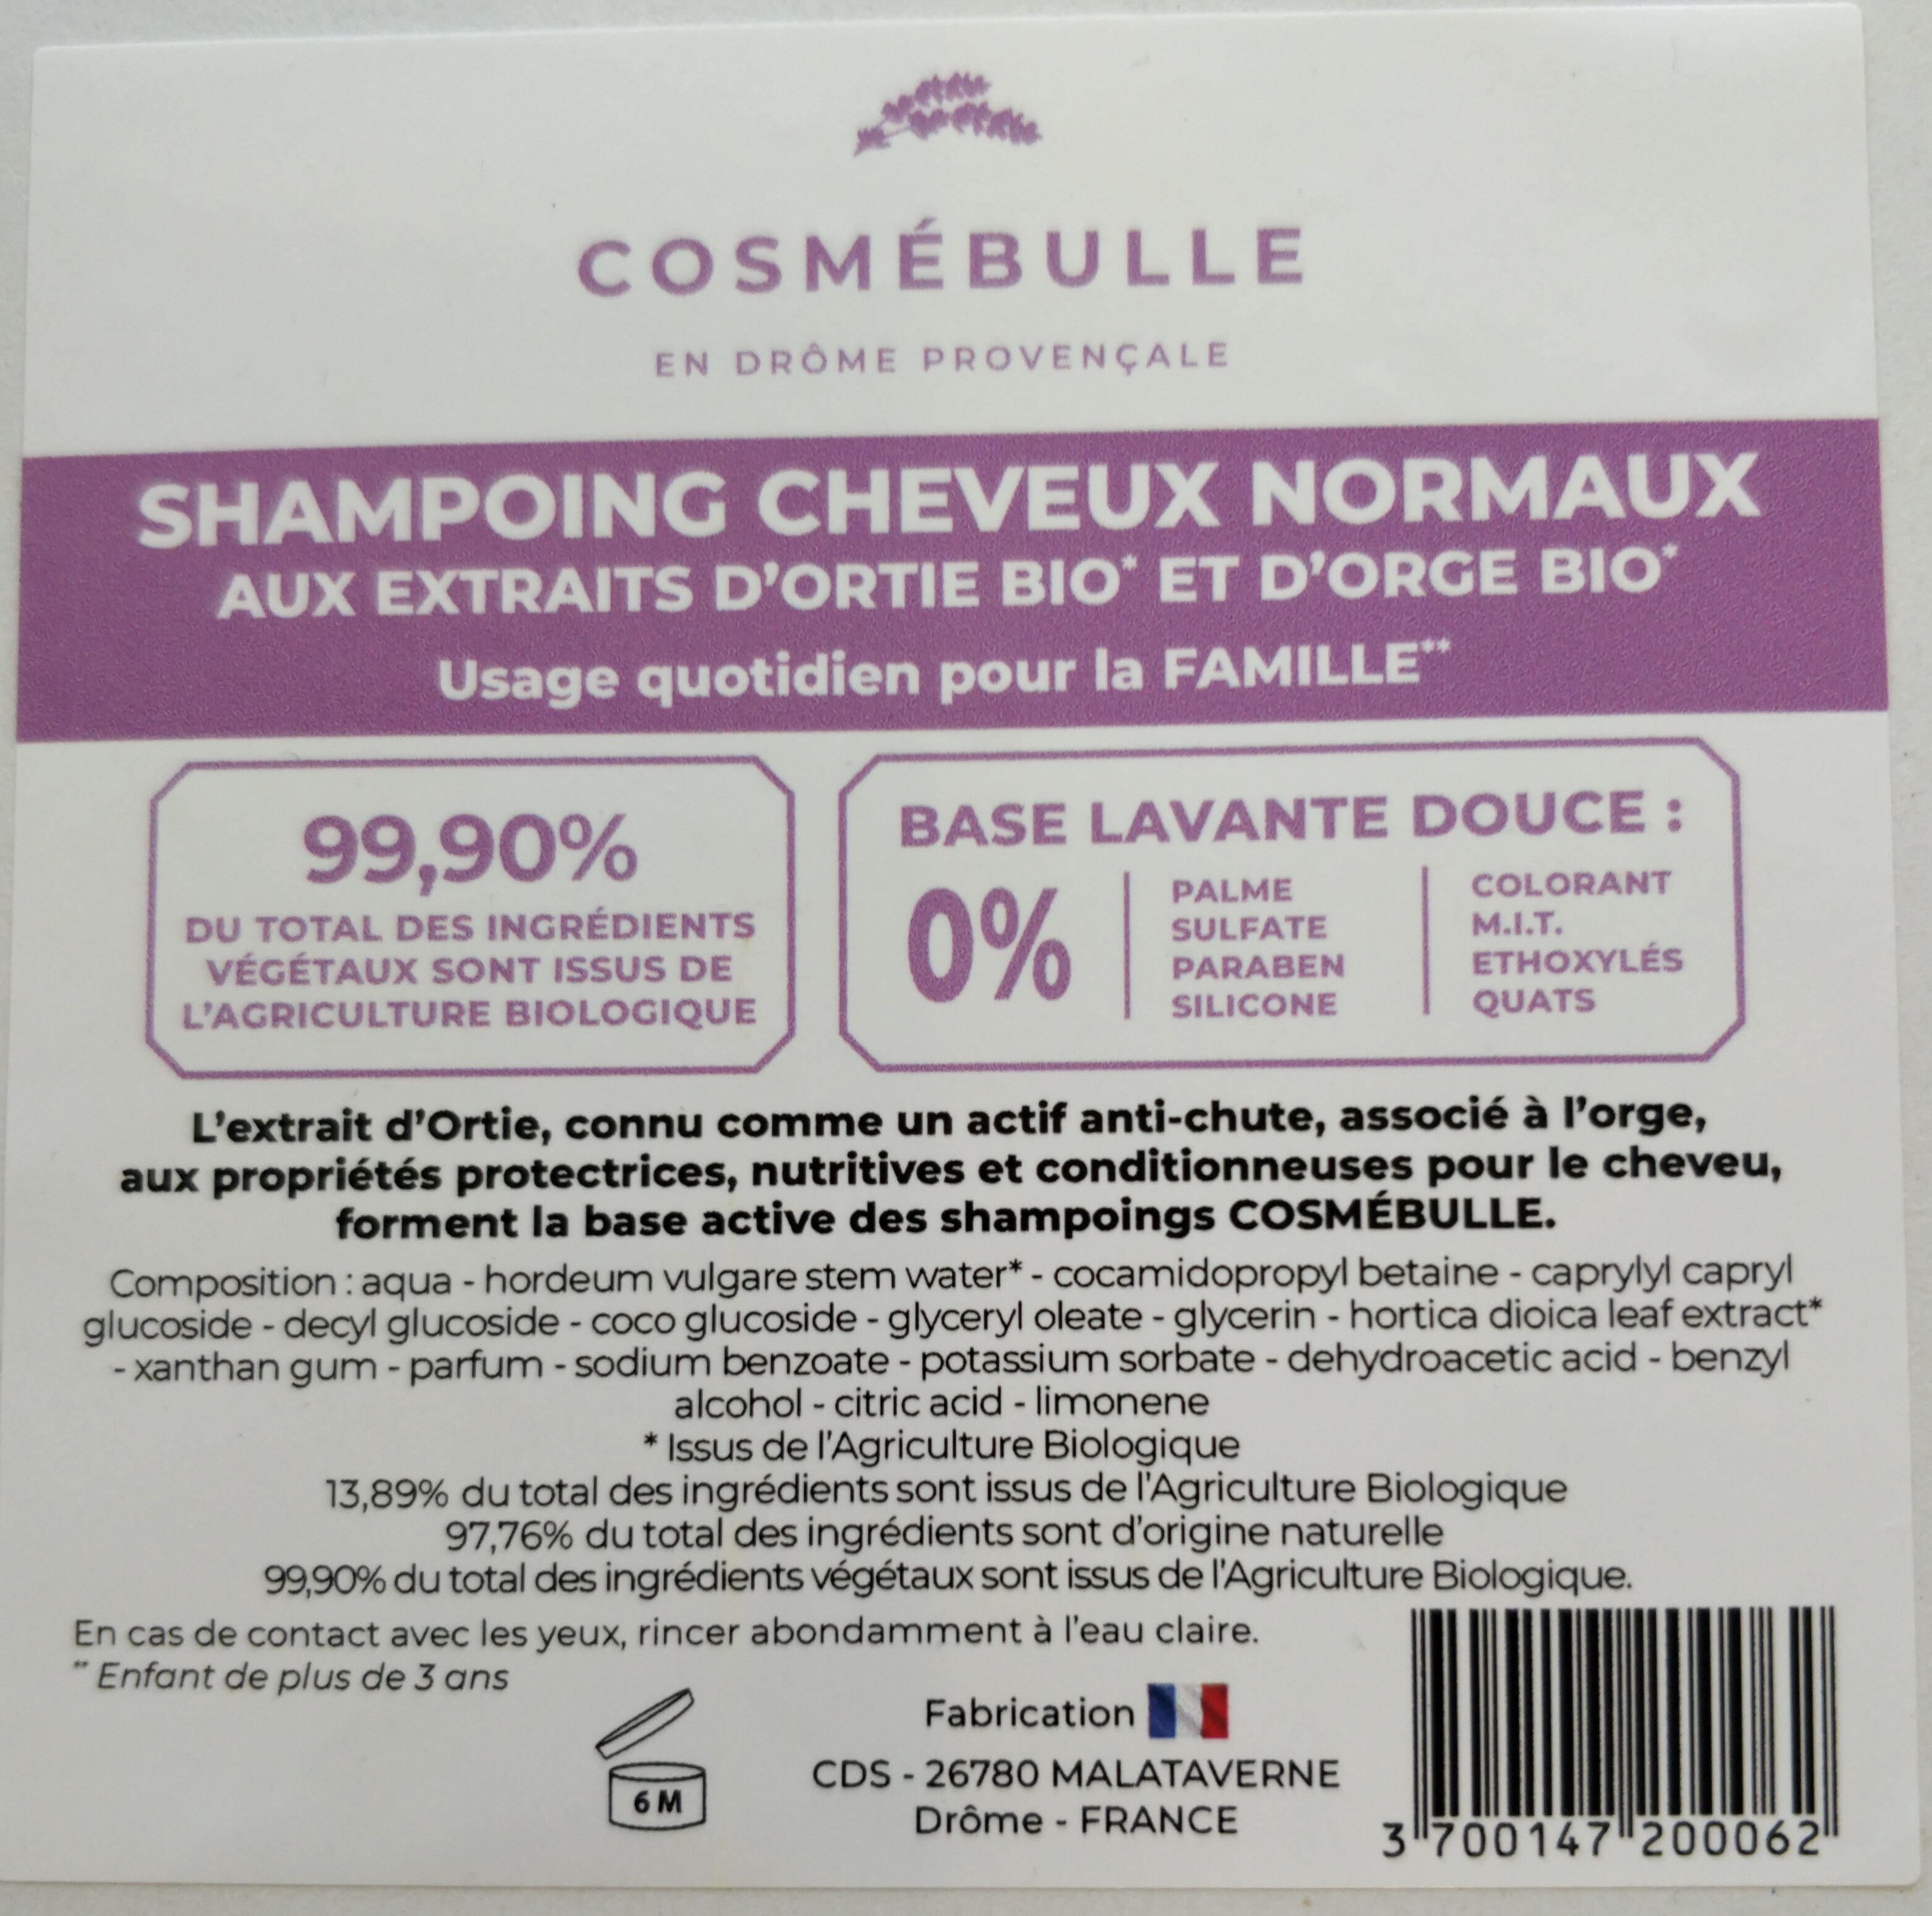 Shampoing cheveux normaux - Product - fr